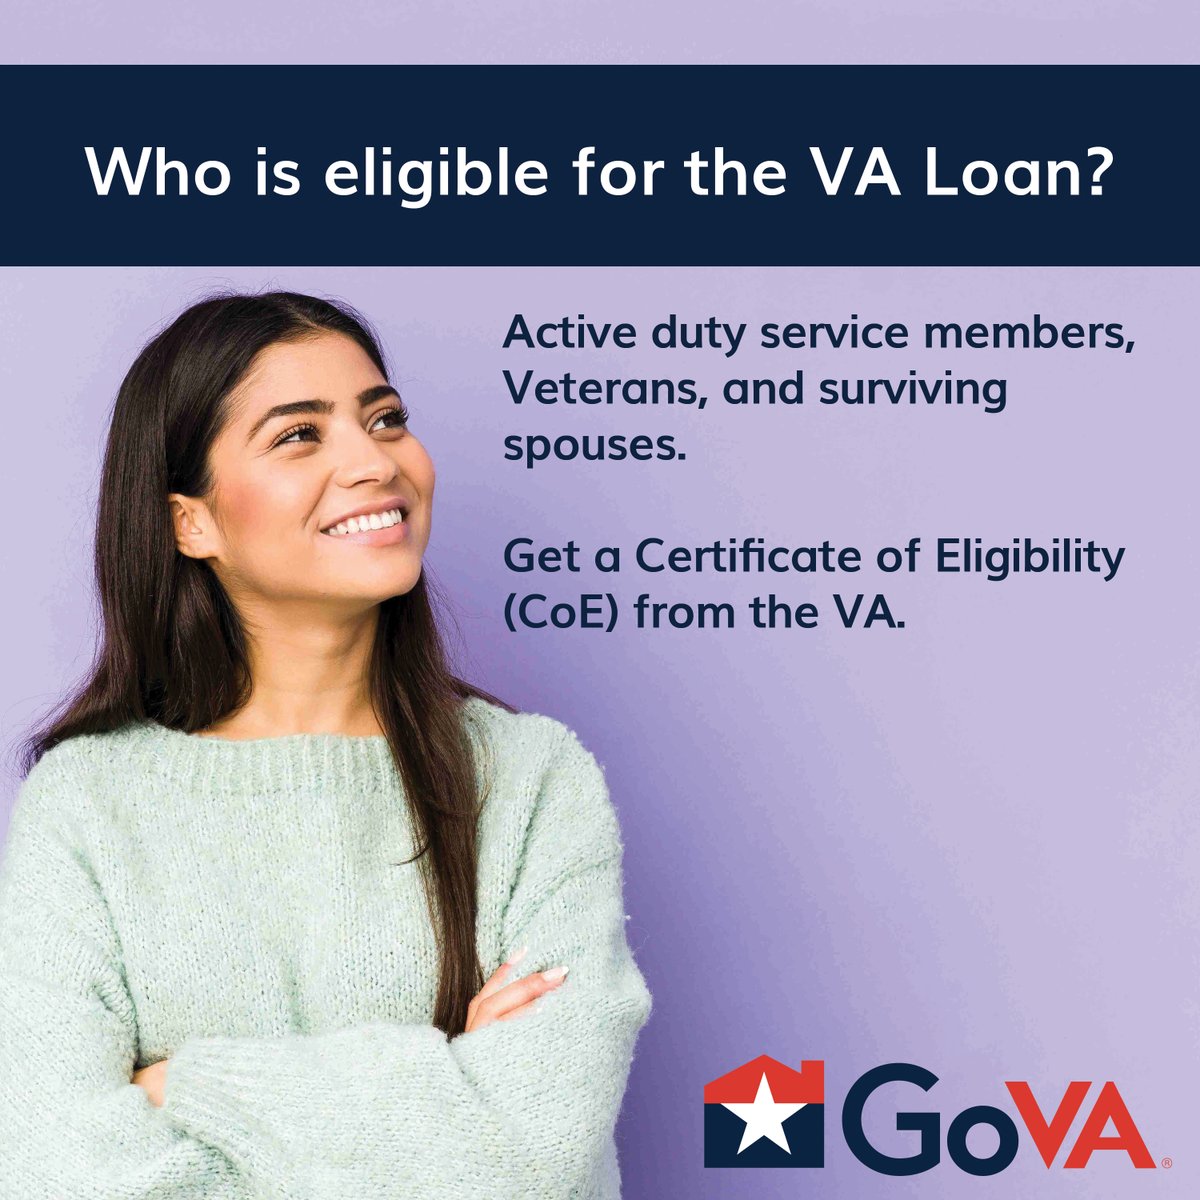 Calling all military families! Did you know about the incredible benefits of the VA loan? If you're a military family looking to buy a home, this is a must-read blog post!
hubs.li/Q026Ykzd0

#VALoan #MilitaryFamilies #Homeownership #VeteransBenefits #FinancialSecurity